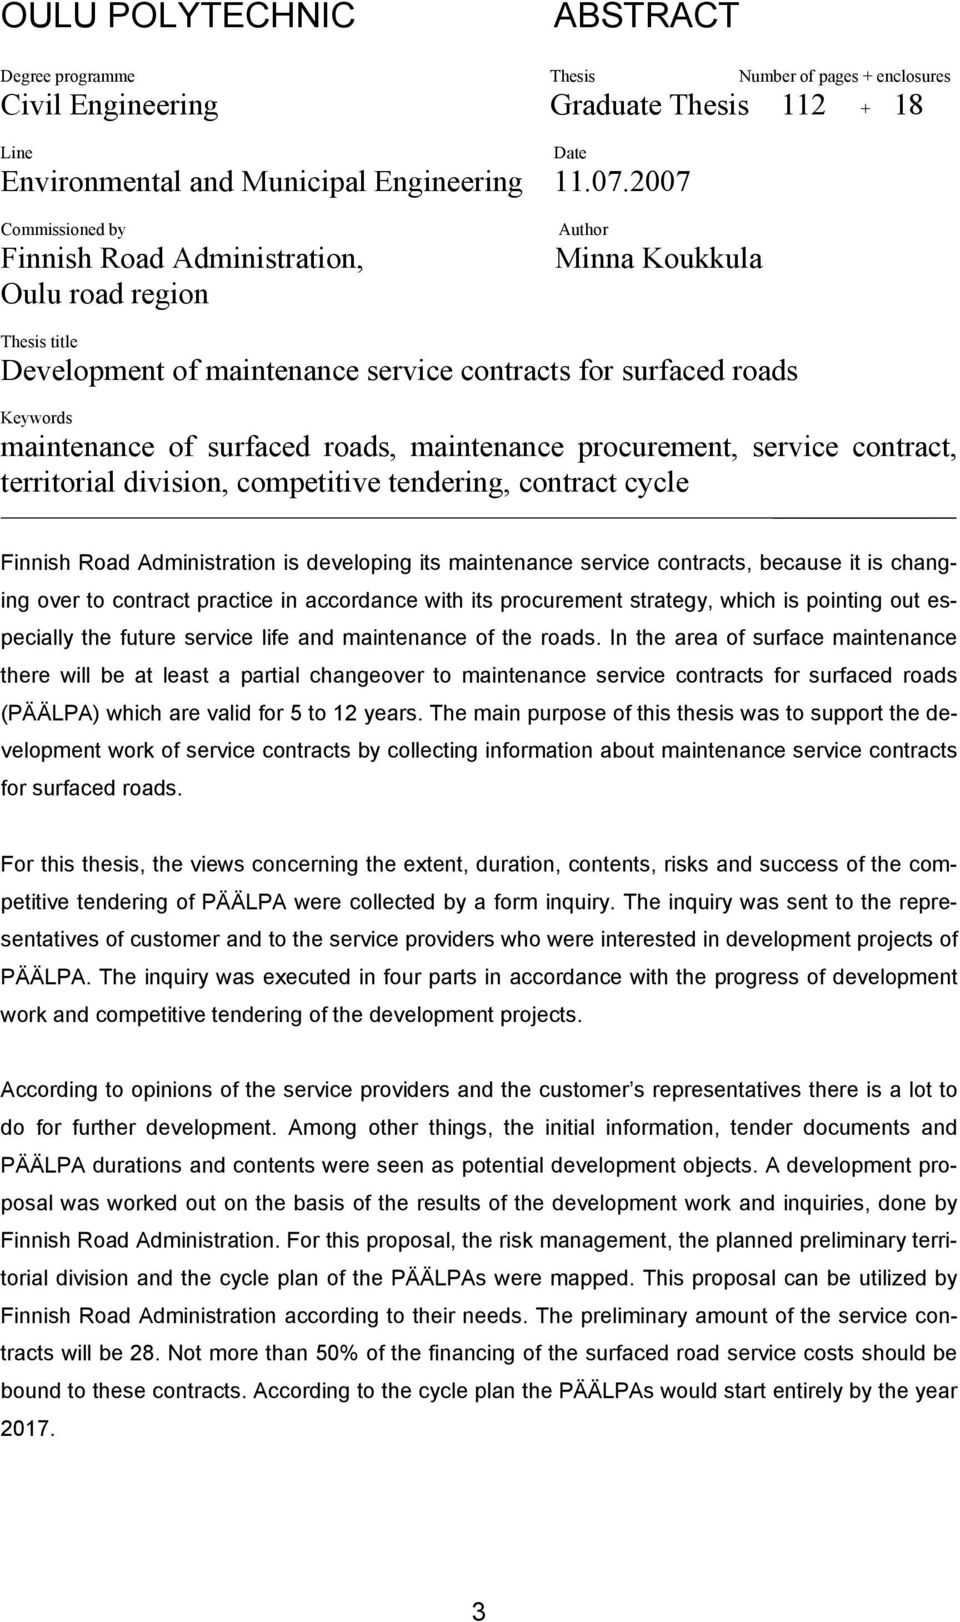 surfaced roads, maintenance procurement, service contract, territorial division, competitive tendering, contract cycle Finnish Road Administration is developing its maintenance service contracts,